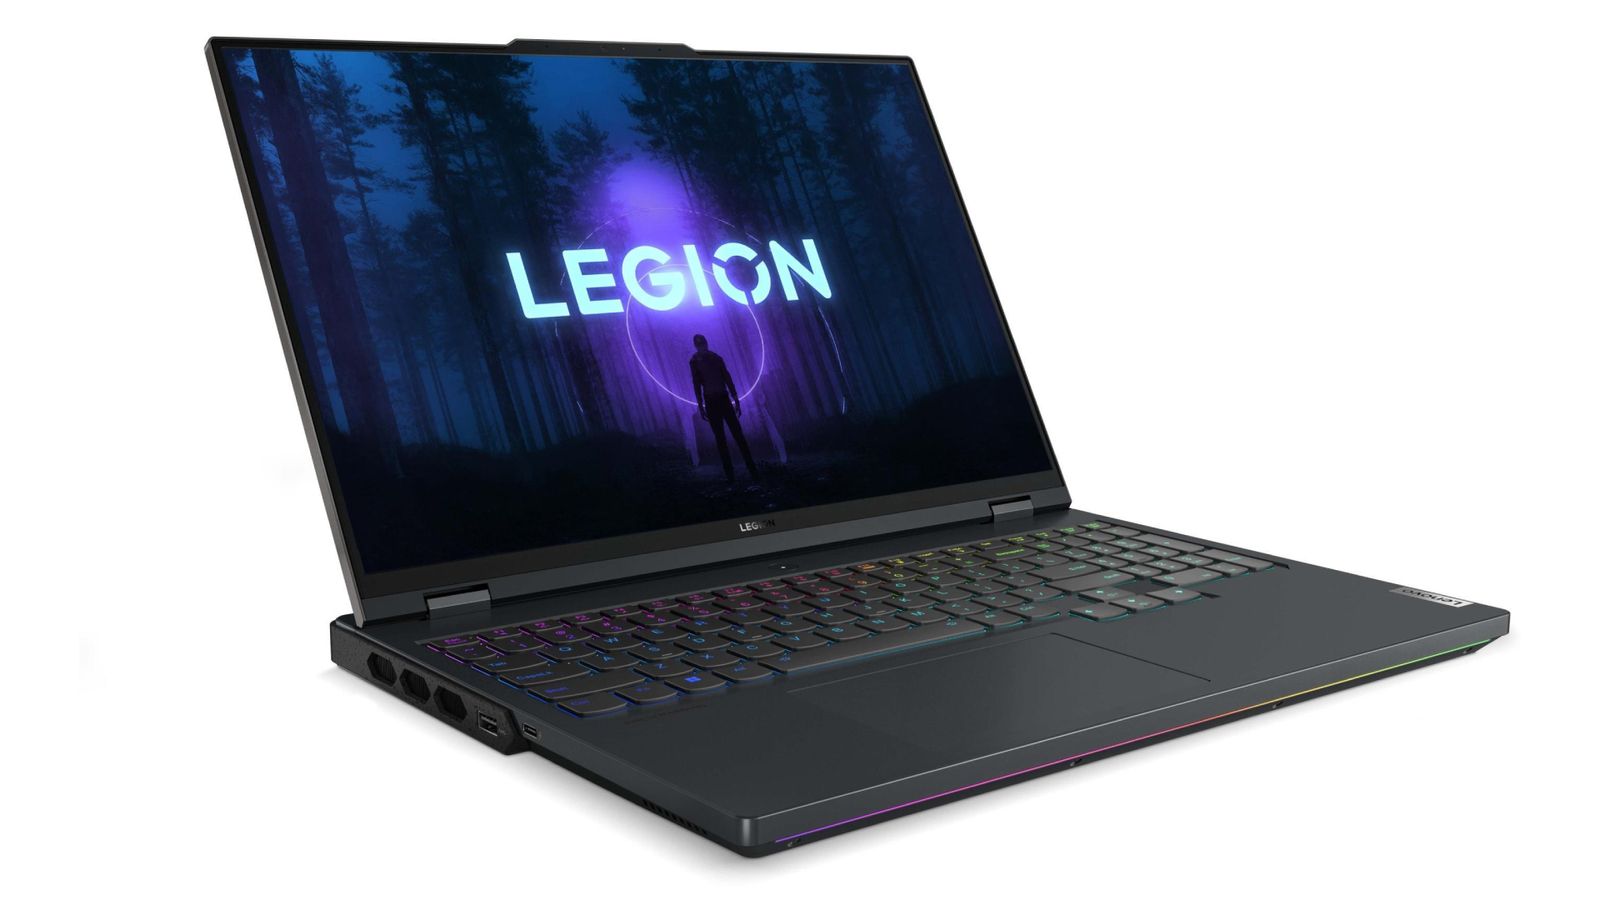 Best Starfield gaming laptop - Lenovo Legion 7i product image of a black gaming laptop featuring multicoloured backlit keys and a graphic of someone in a dark forest below Legion branding on the display.